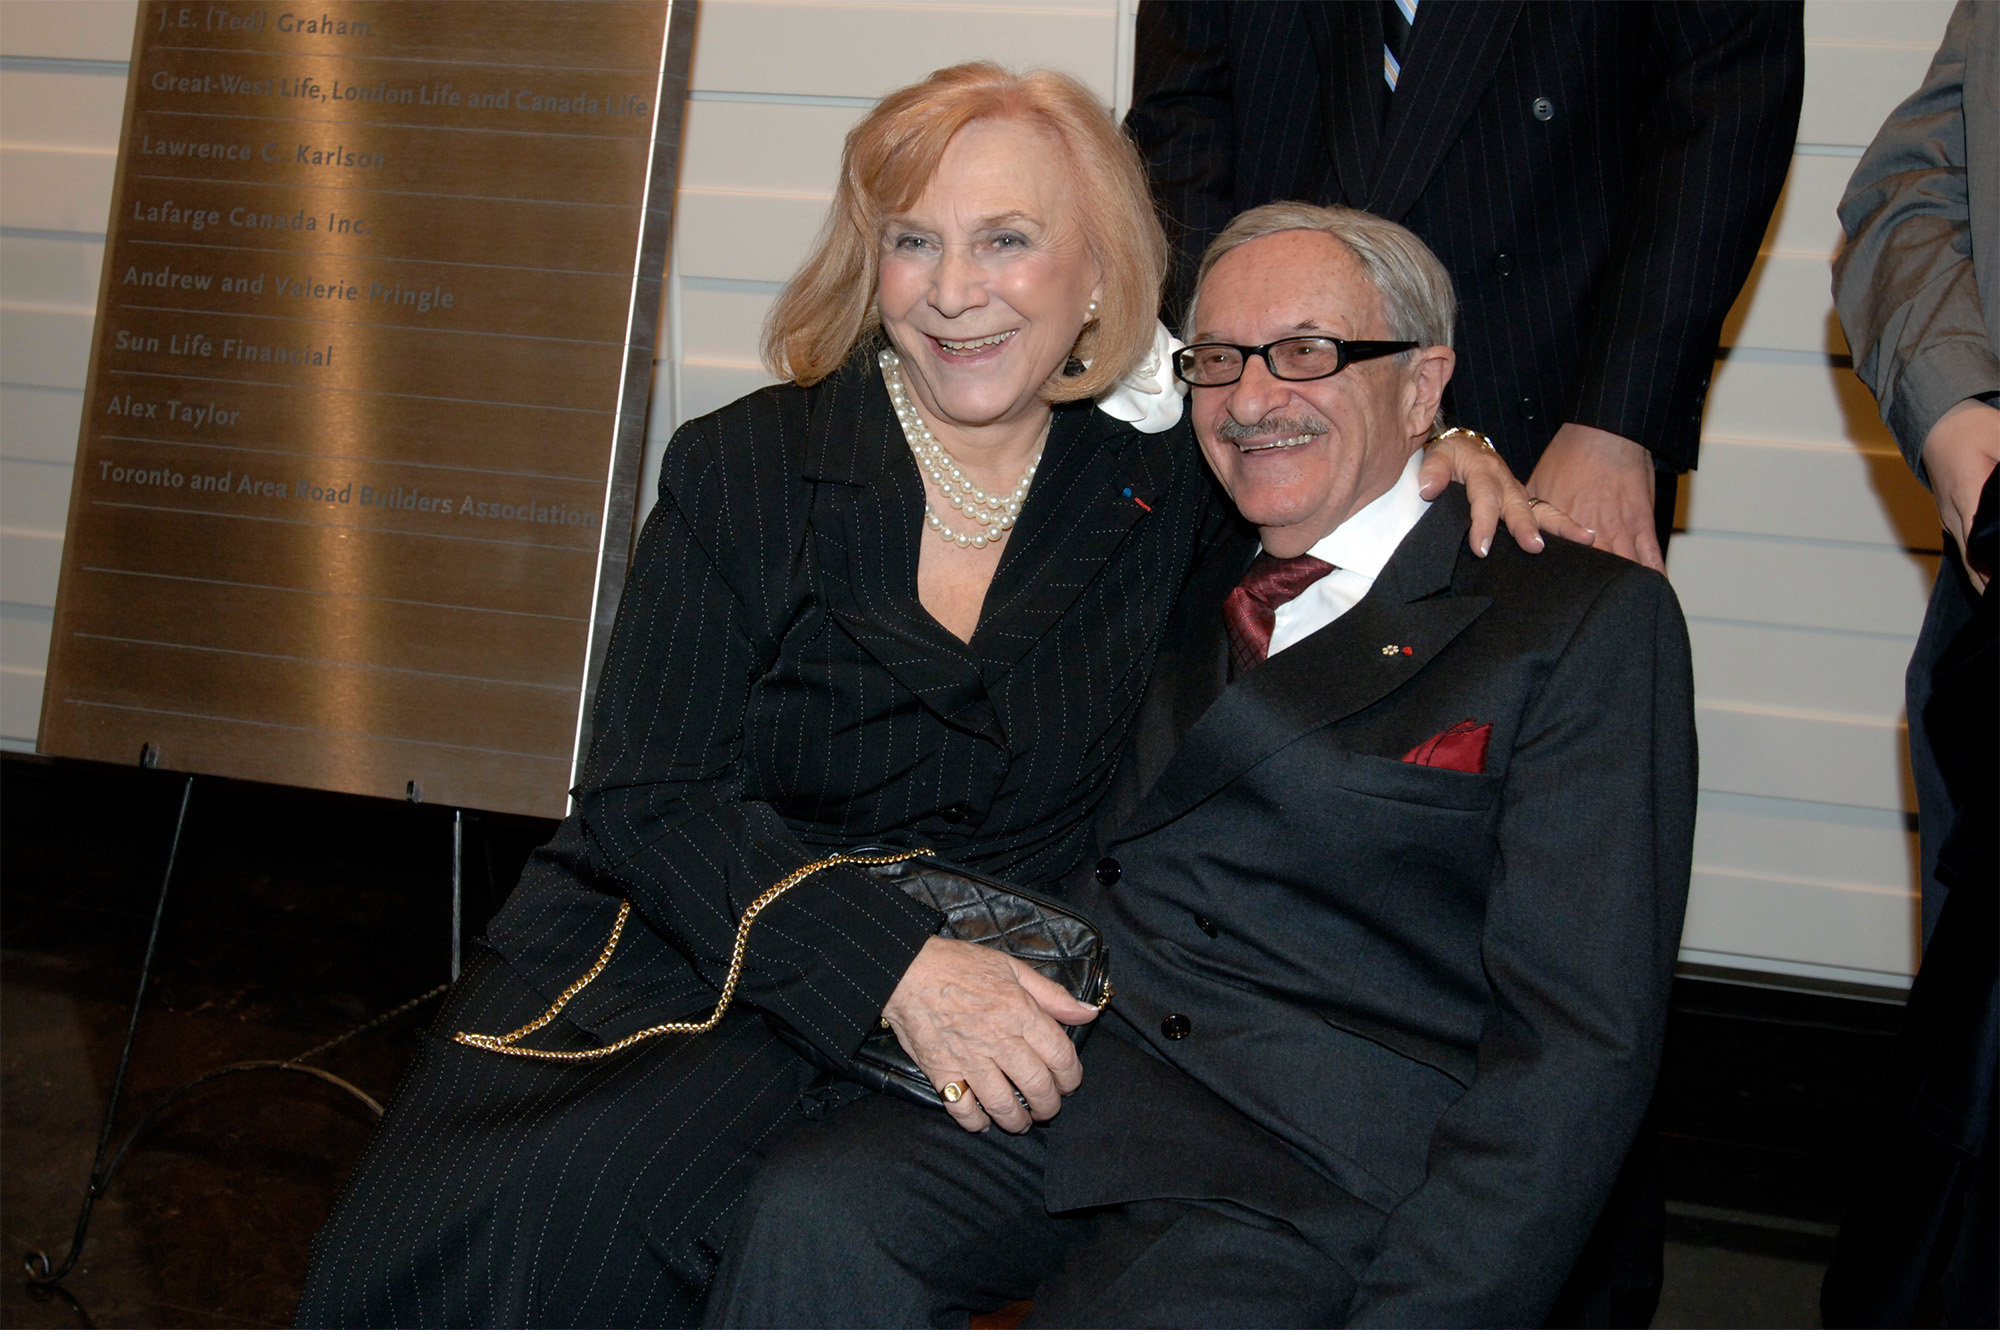 Helen and George Vari sitting together and smiling.